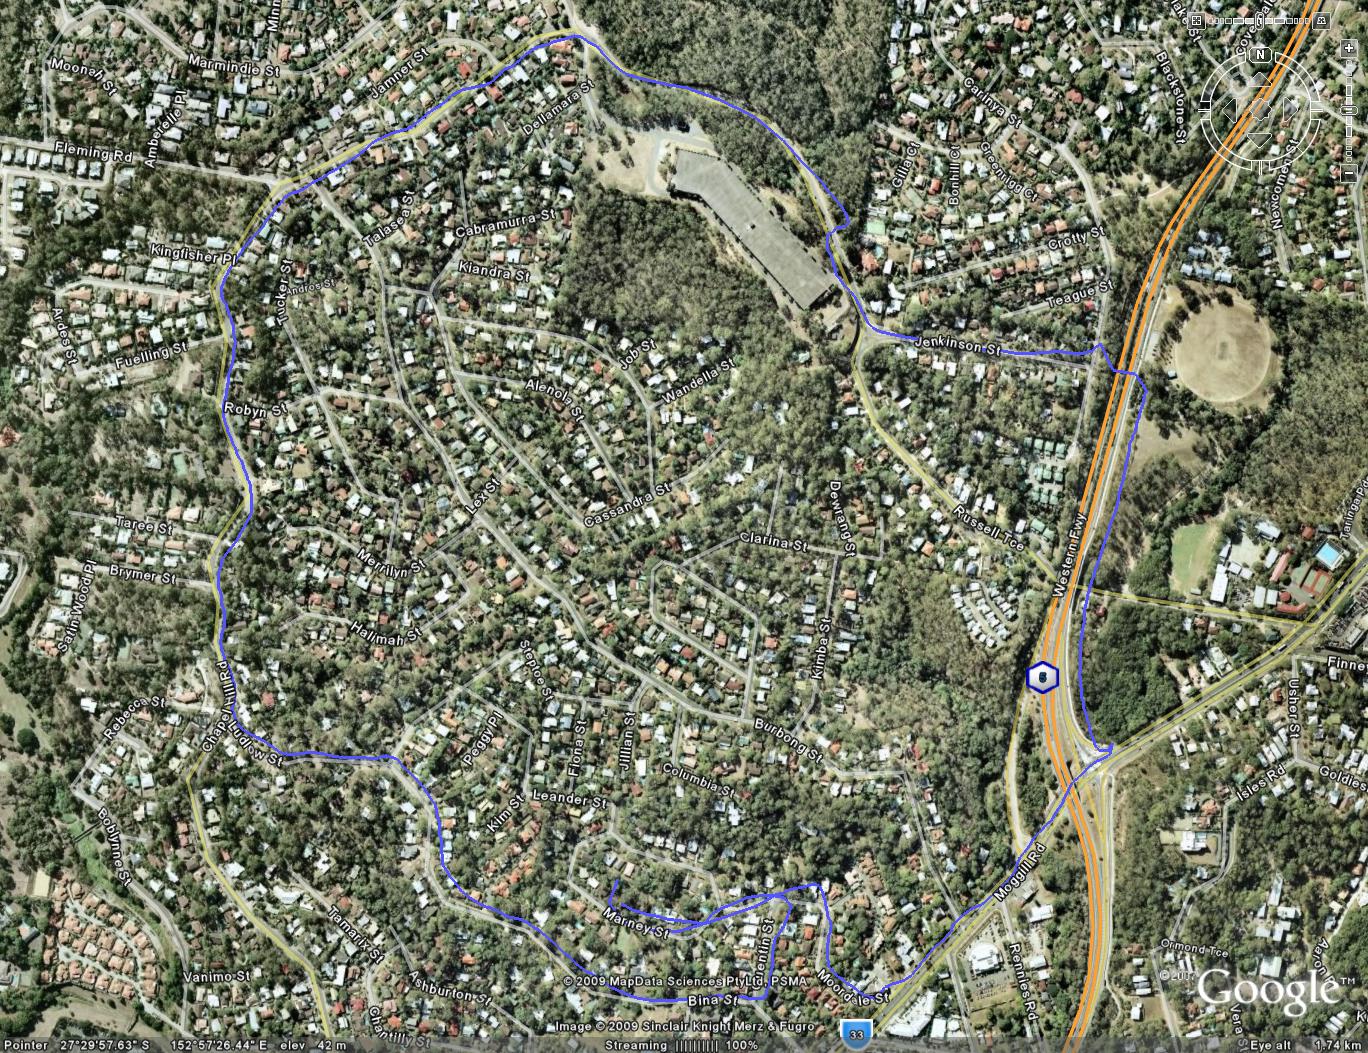 Google Earth image of track